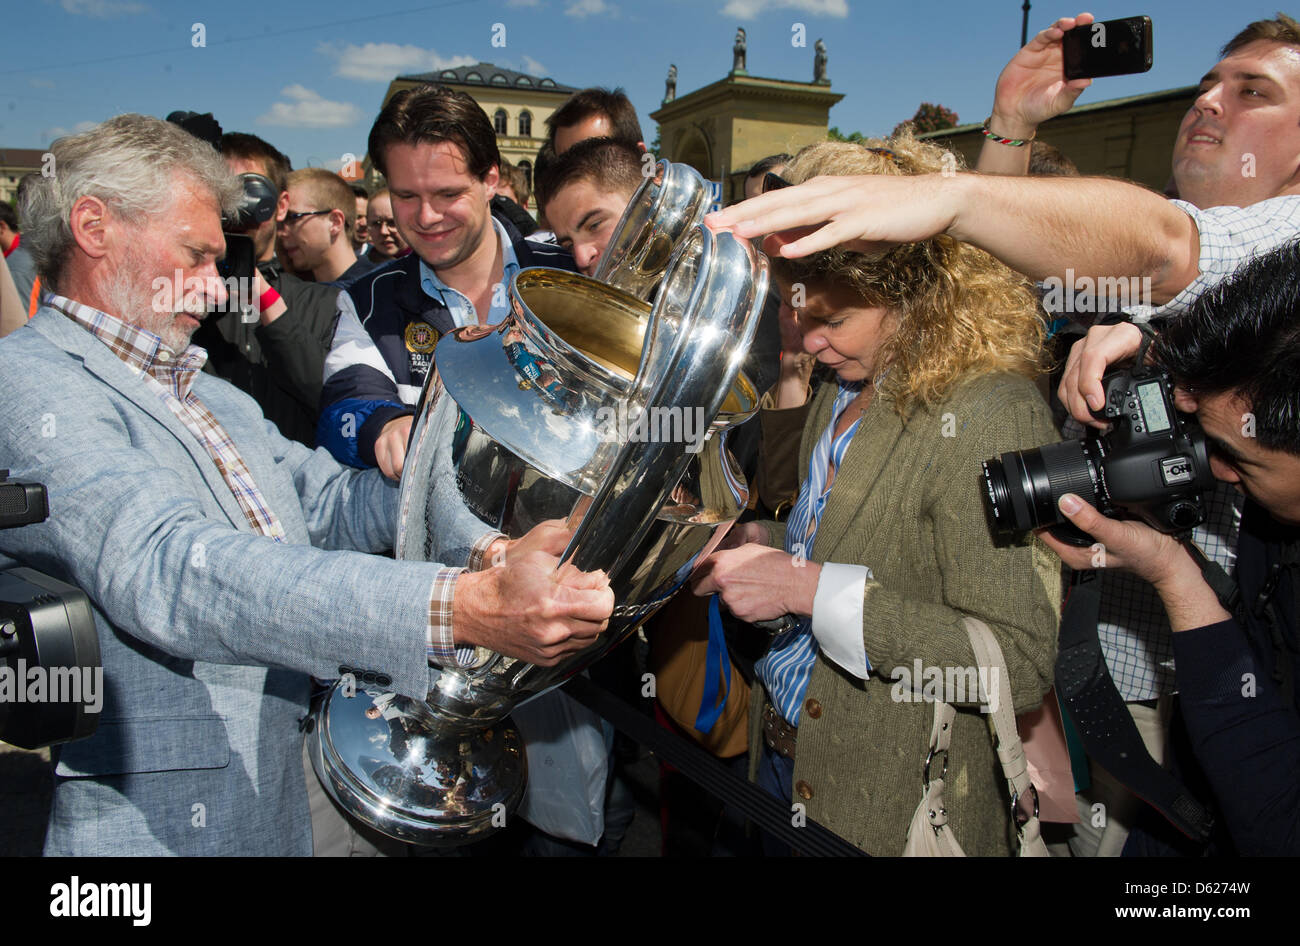 Former Bayern Munich soccer players Paul Breitner (L) presents the UEFA Champions League Cup during a Champions League Cup bus tour in Munich, Germany, 14 May 2012. The Champions League final match between FC Bayern Munich and Chelsea FC will take place on 19 May 2012. Photo: PETER KNEFFEL Stock Photo